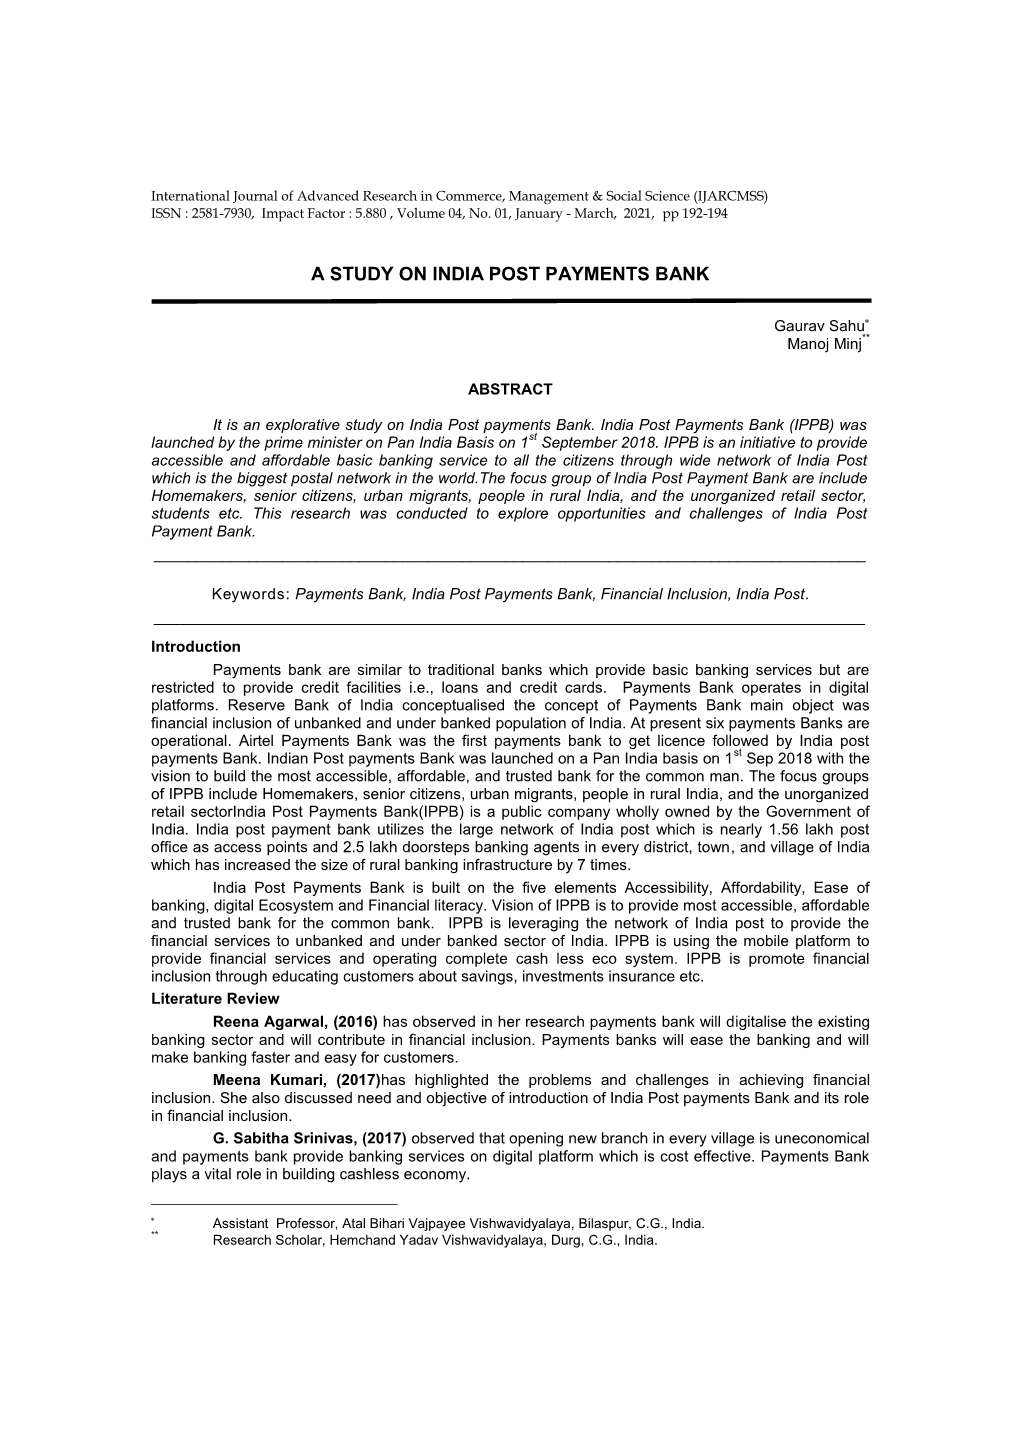 A Study on India Post Payments Bank